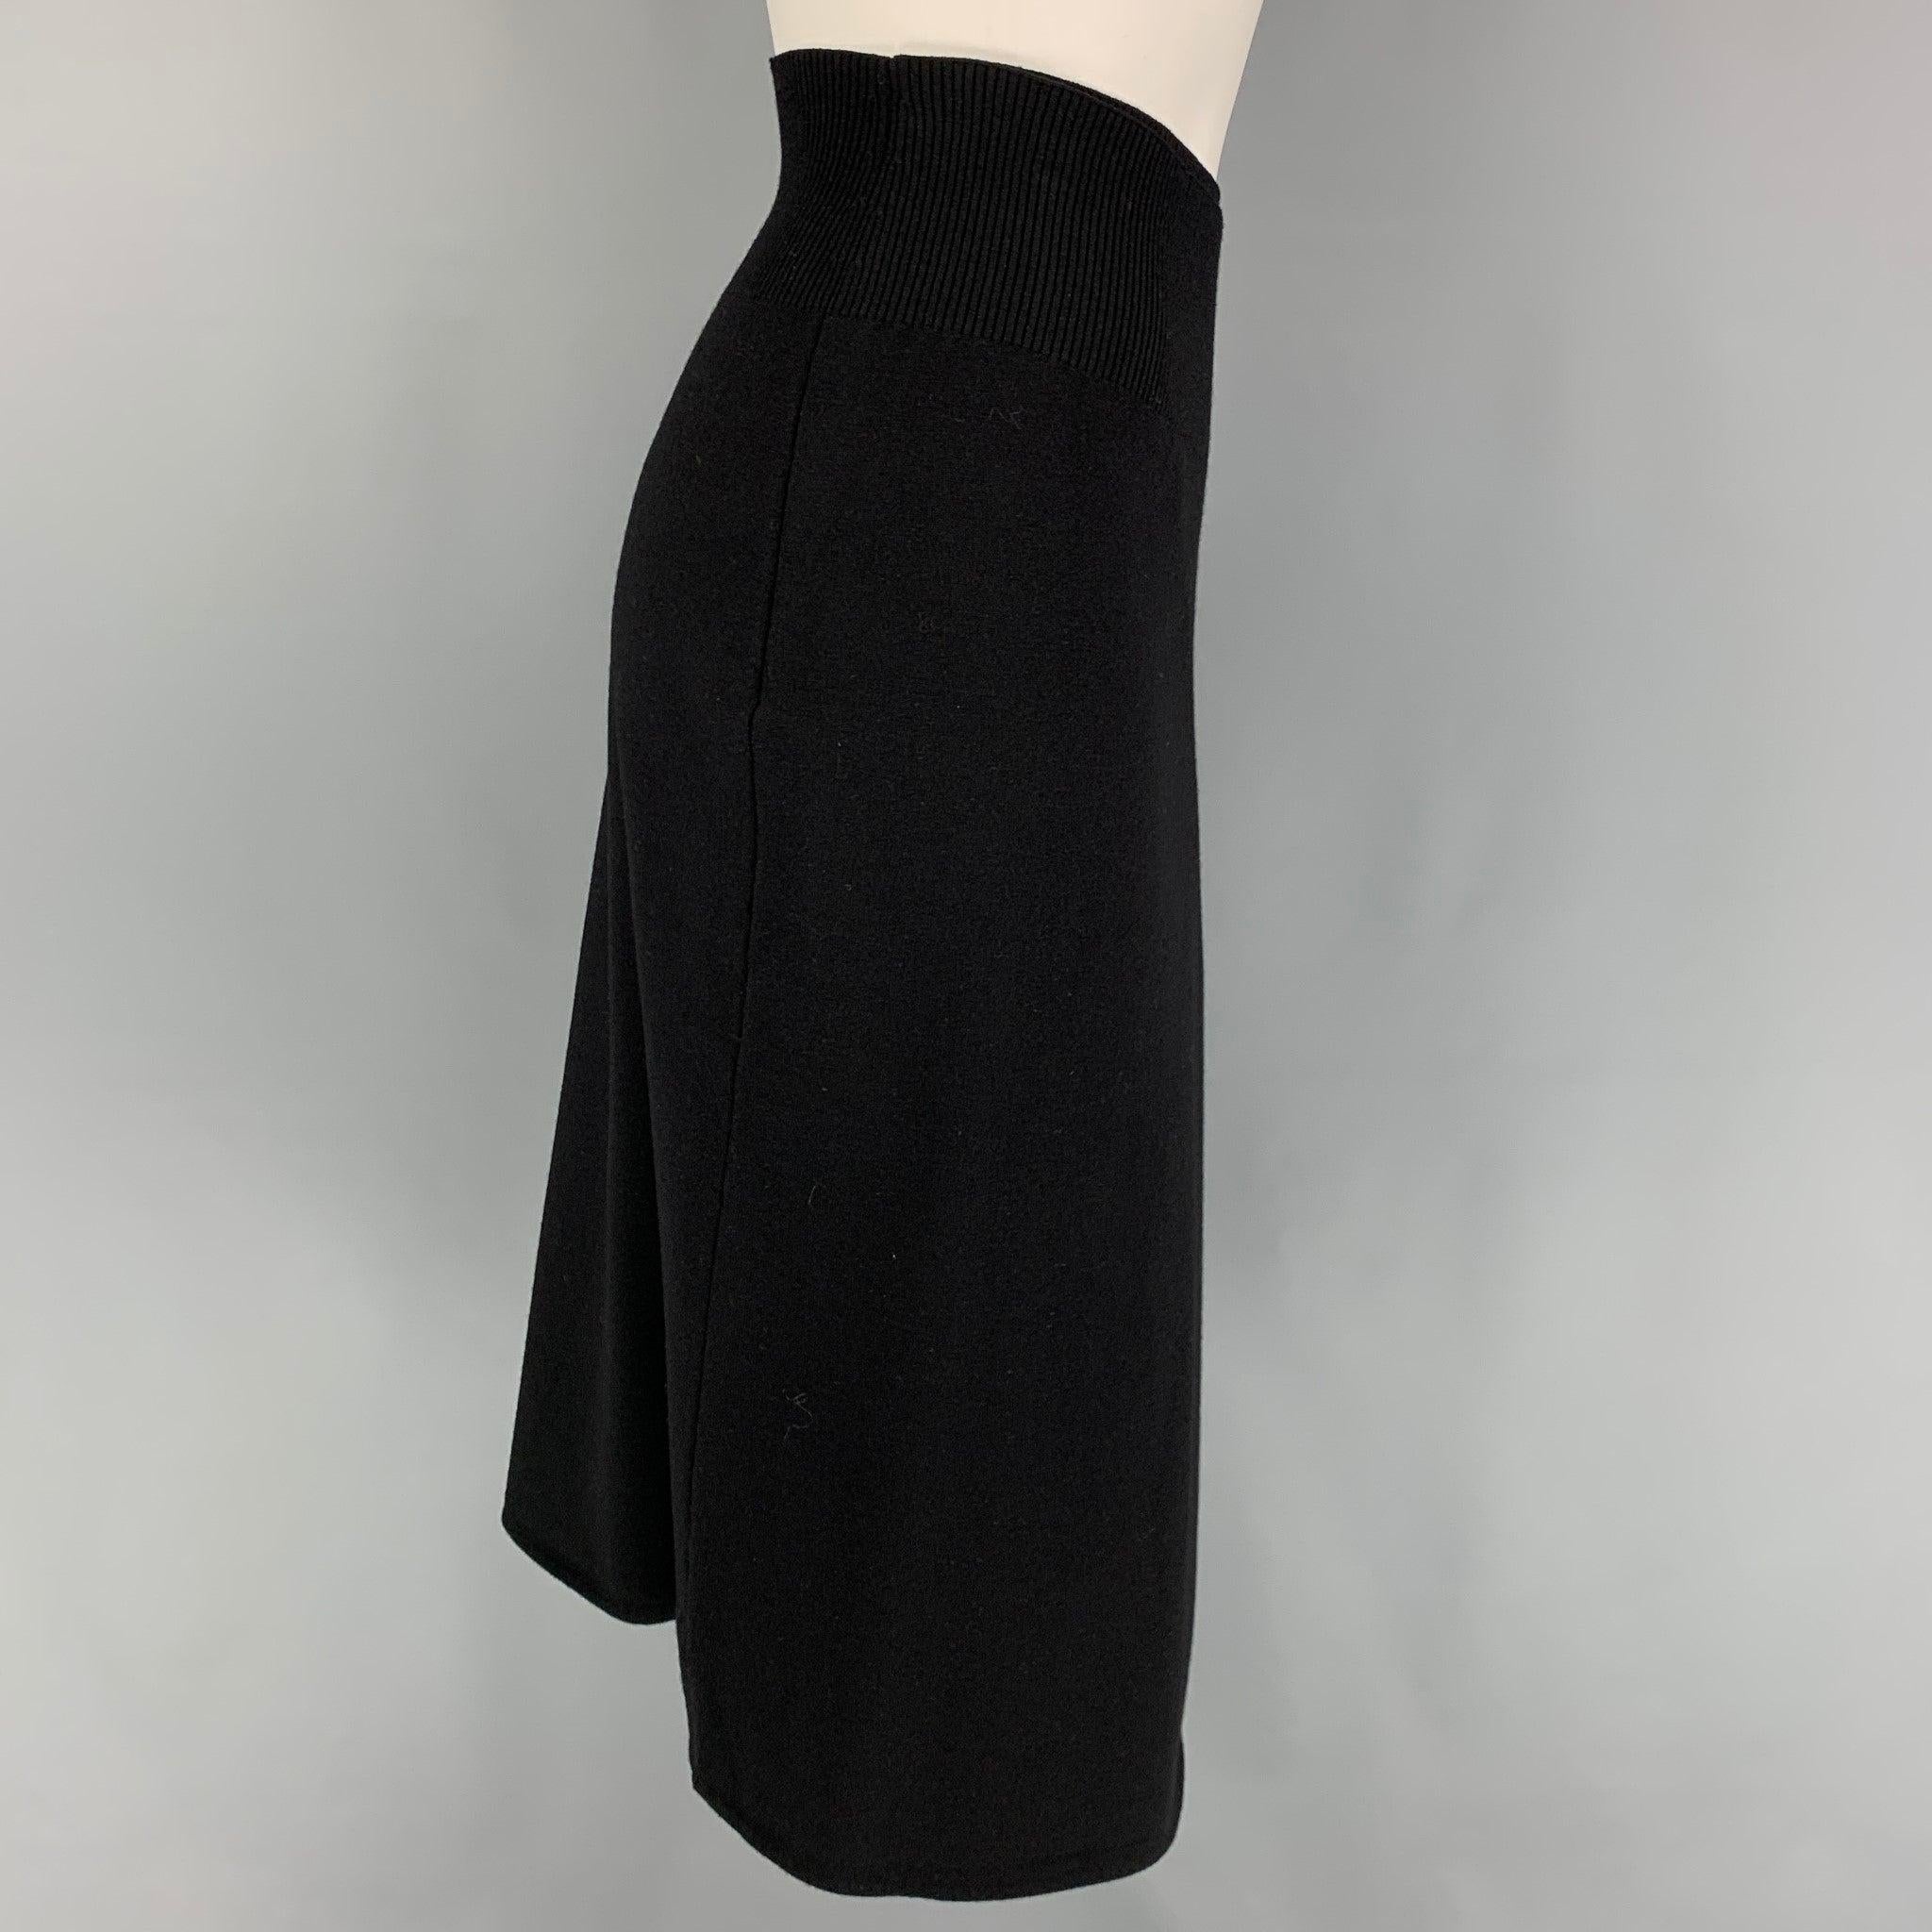 HELMUT LANG skirt comes in a black wool featuring a self tie belt detail, elastic waistband, and a open front.
New With Tags.
 

Marked:   L  

Measurements: 
  Waist: 30 inches  Hip:
38 inches  Length: 26 inches 
  
  
 
Reference: 117097
Category: